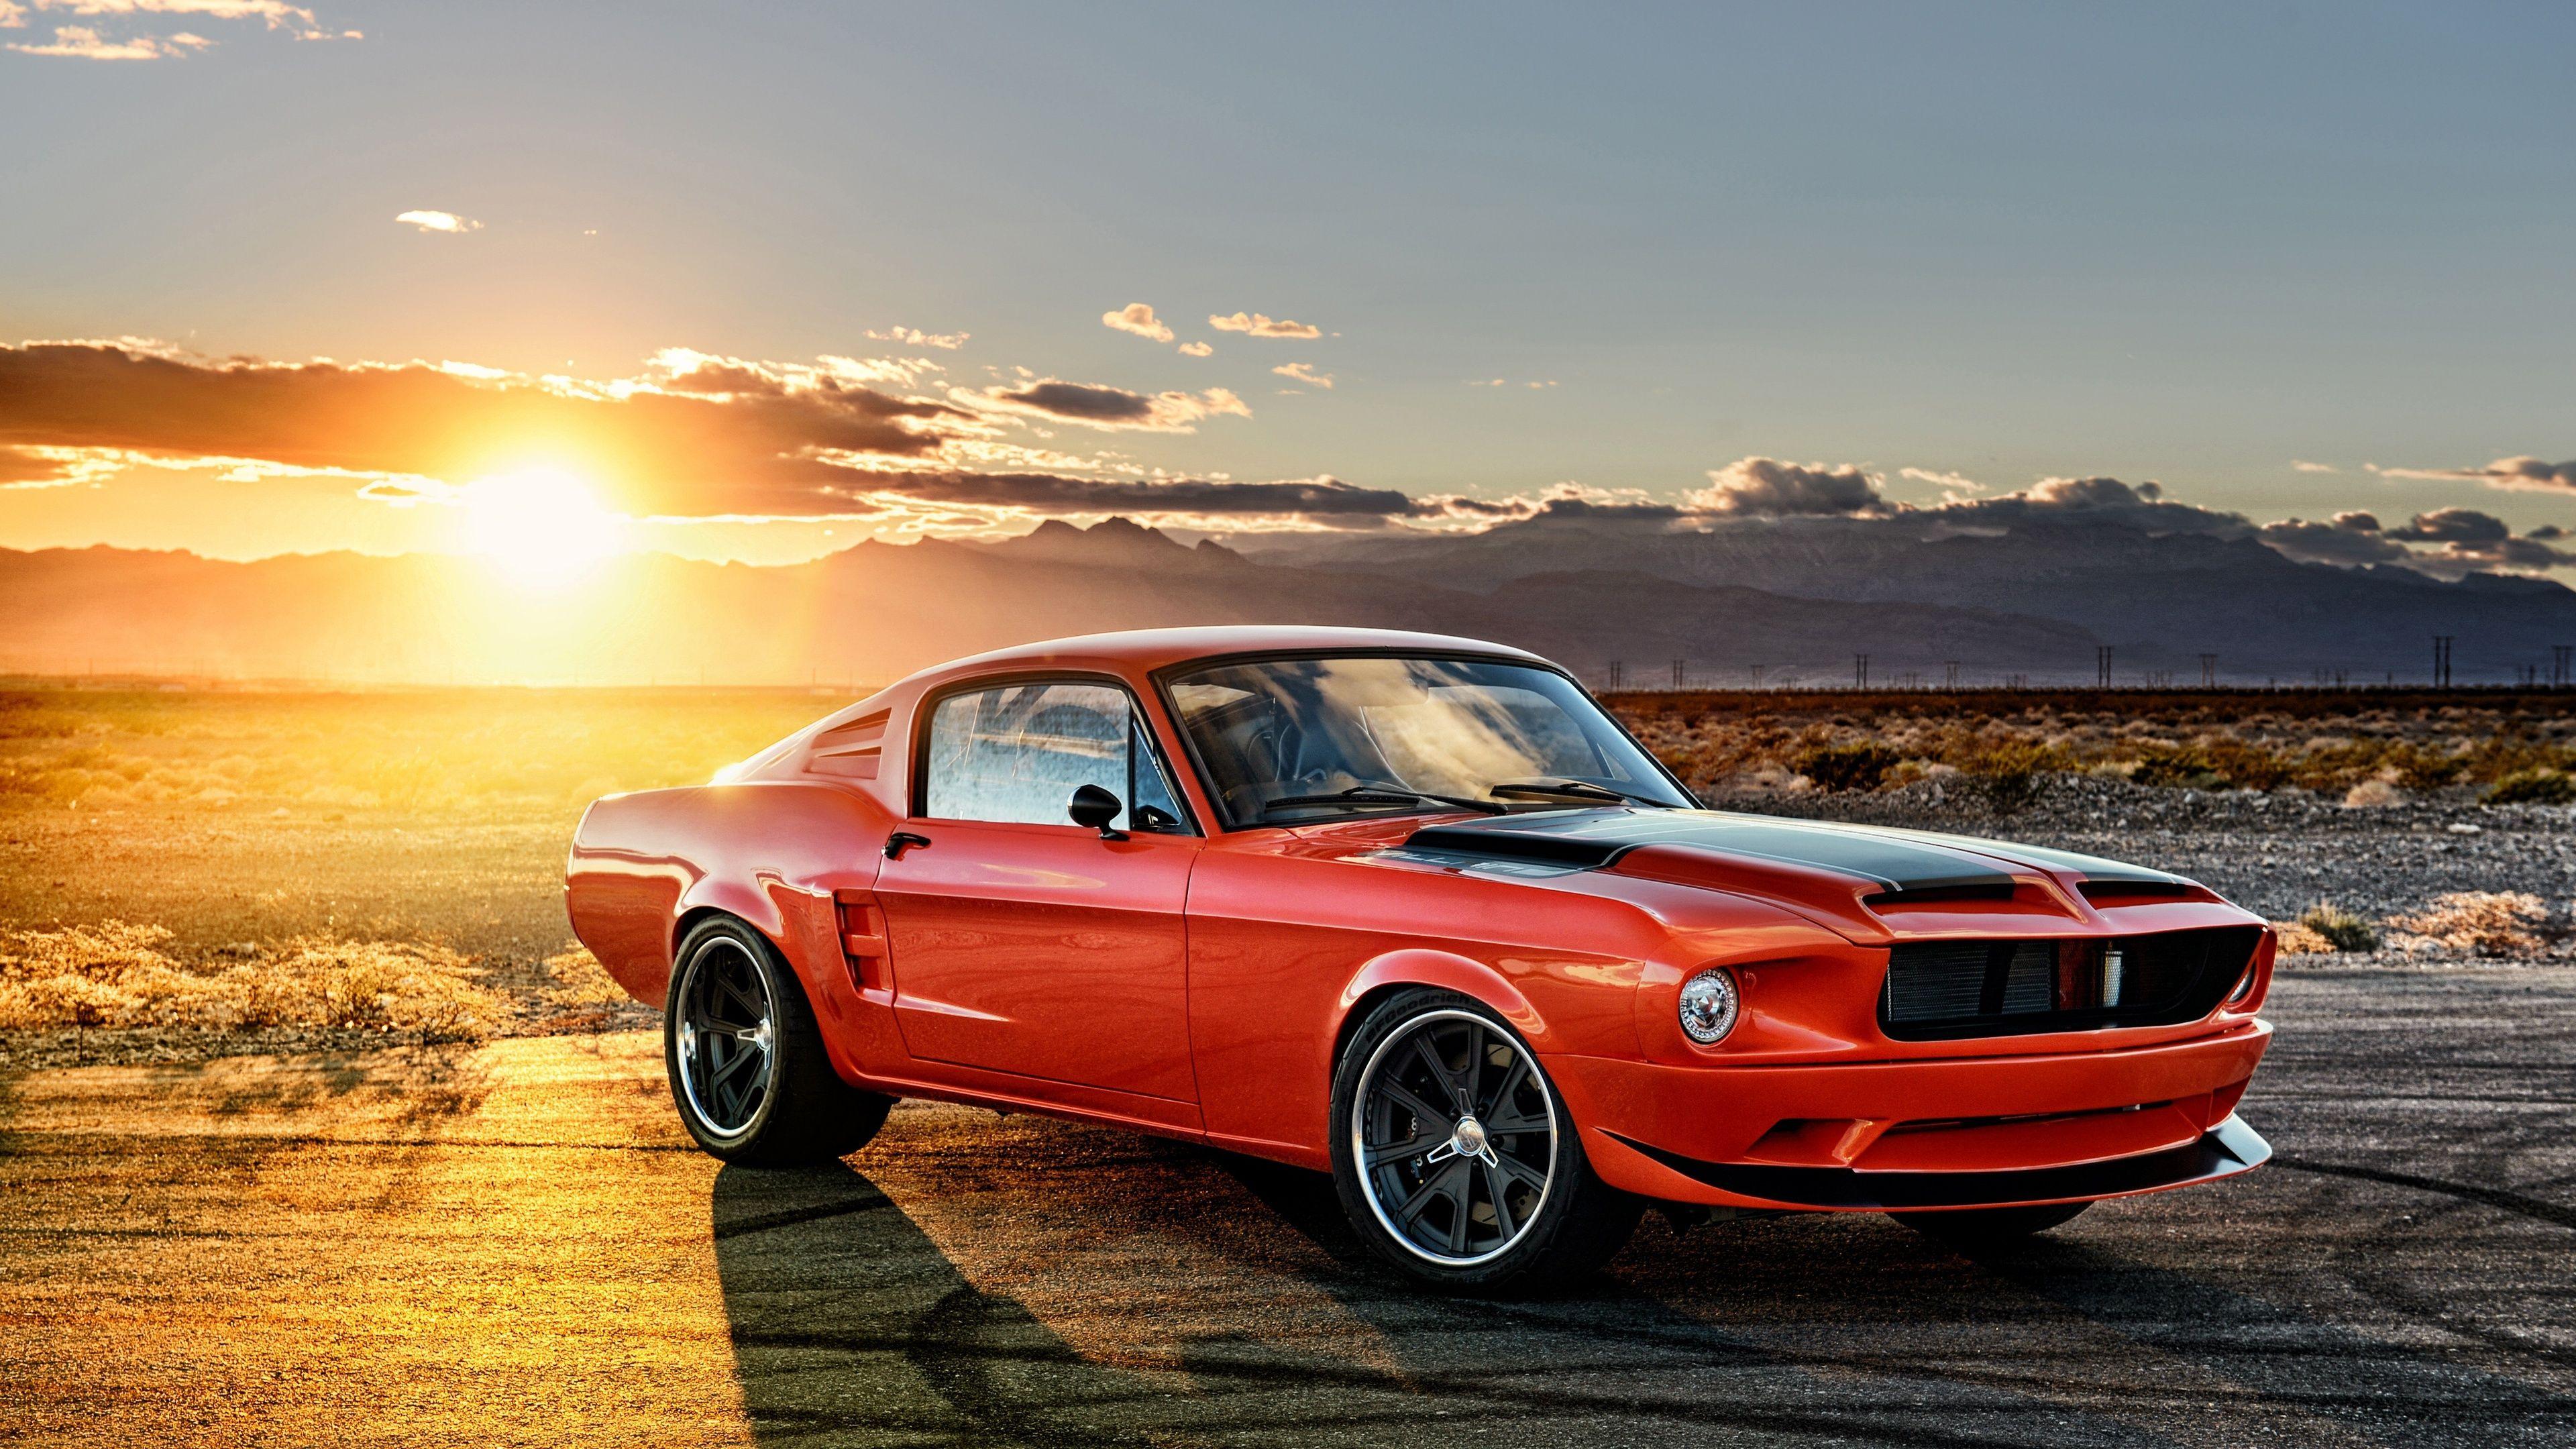 Classic Ford Mustang Wallpaper 74 images